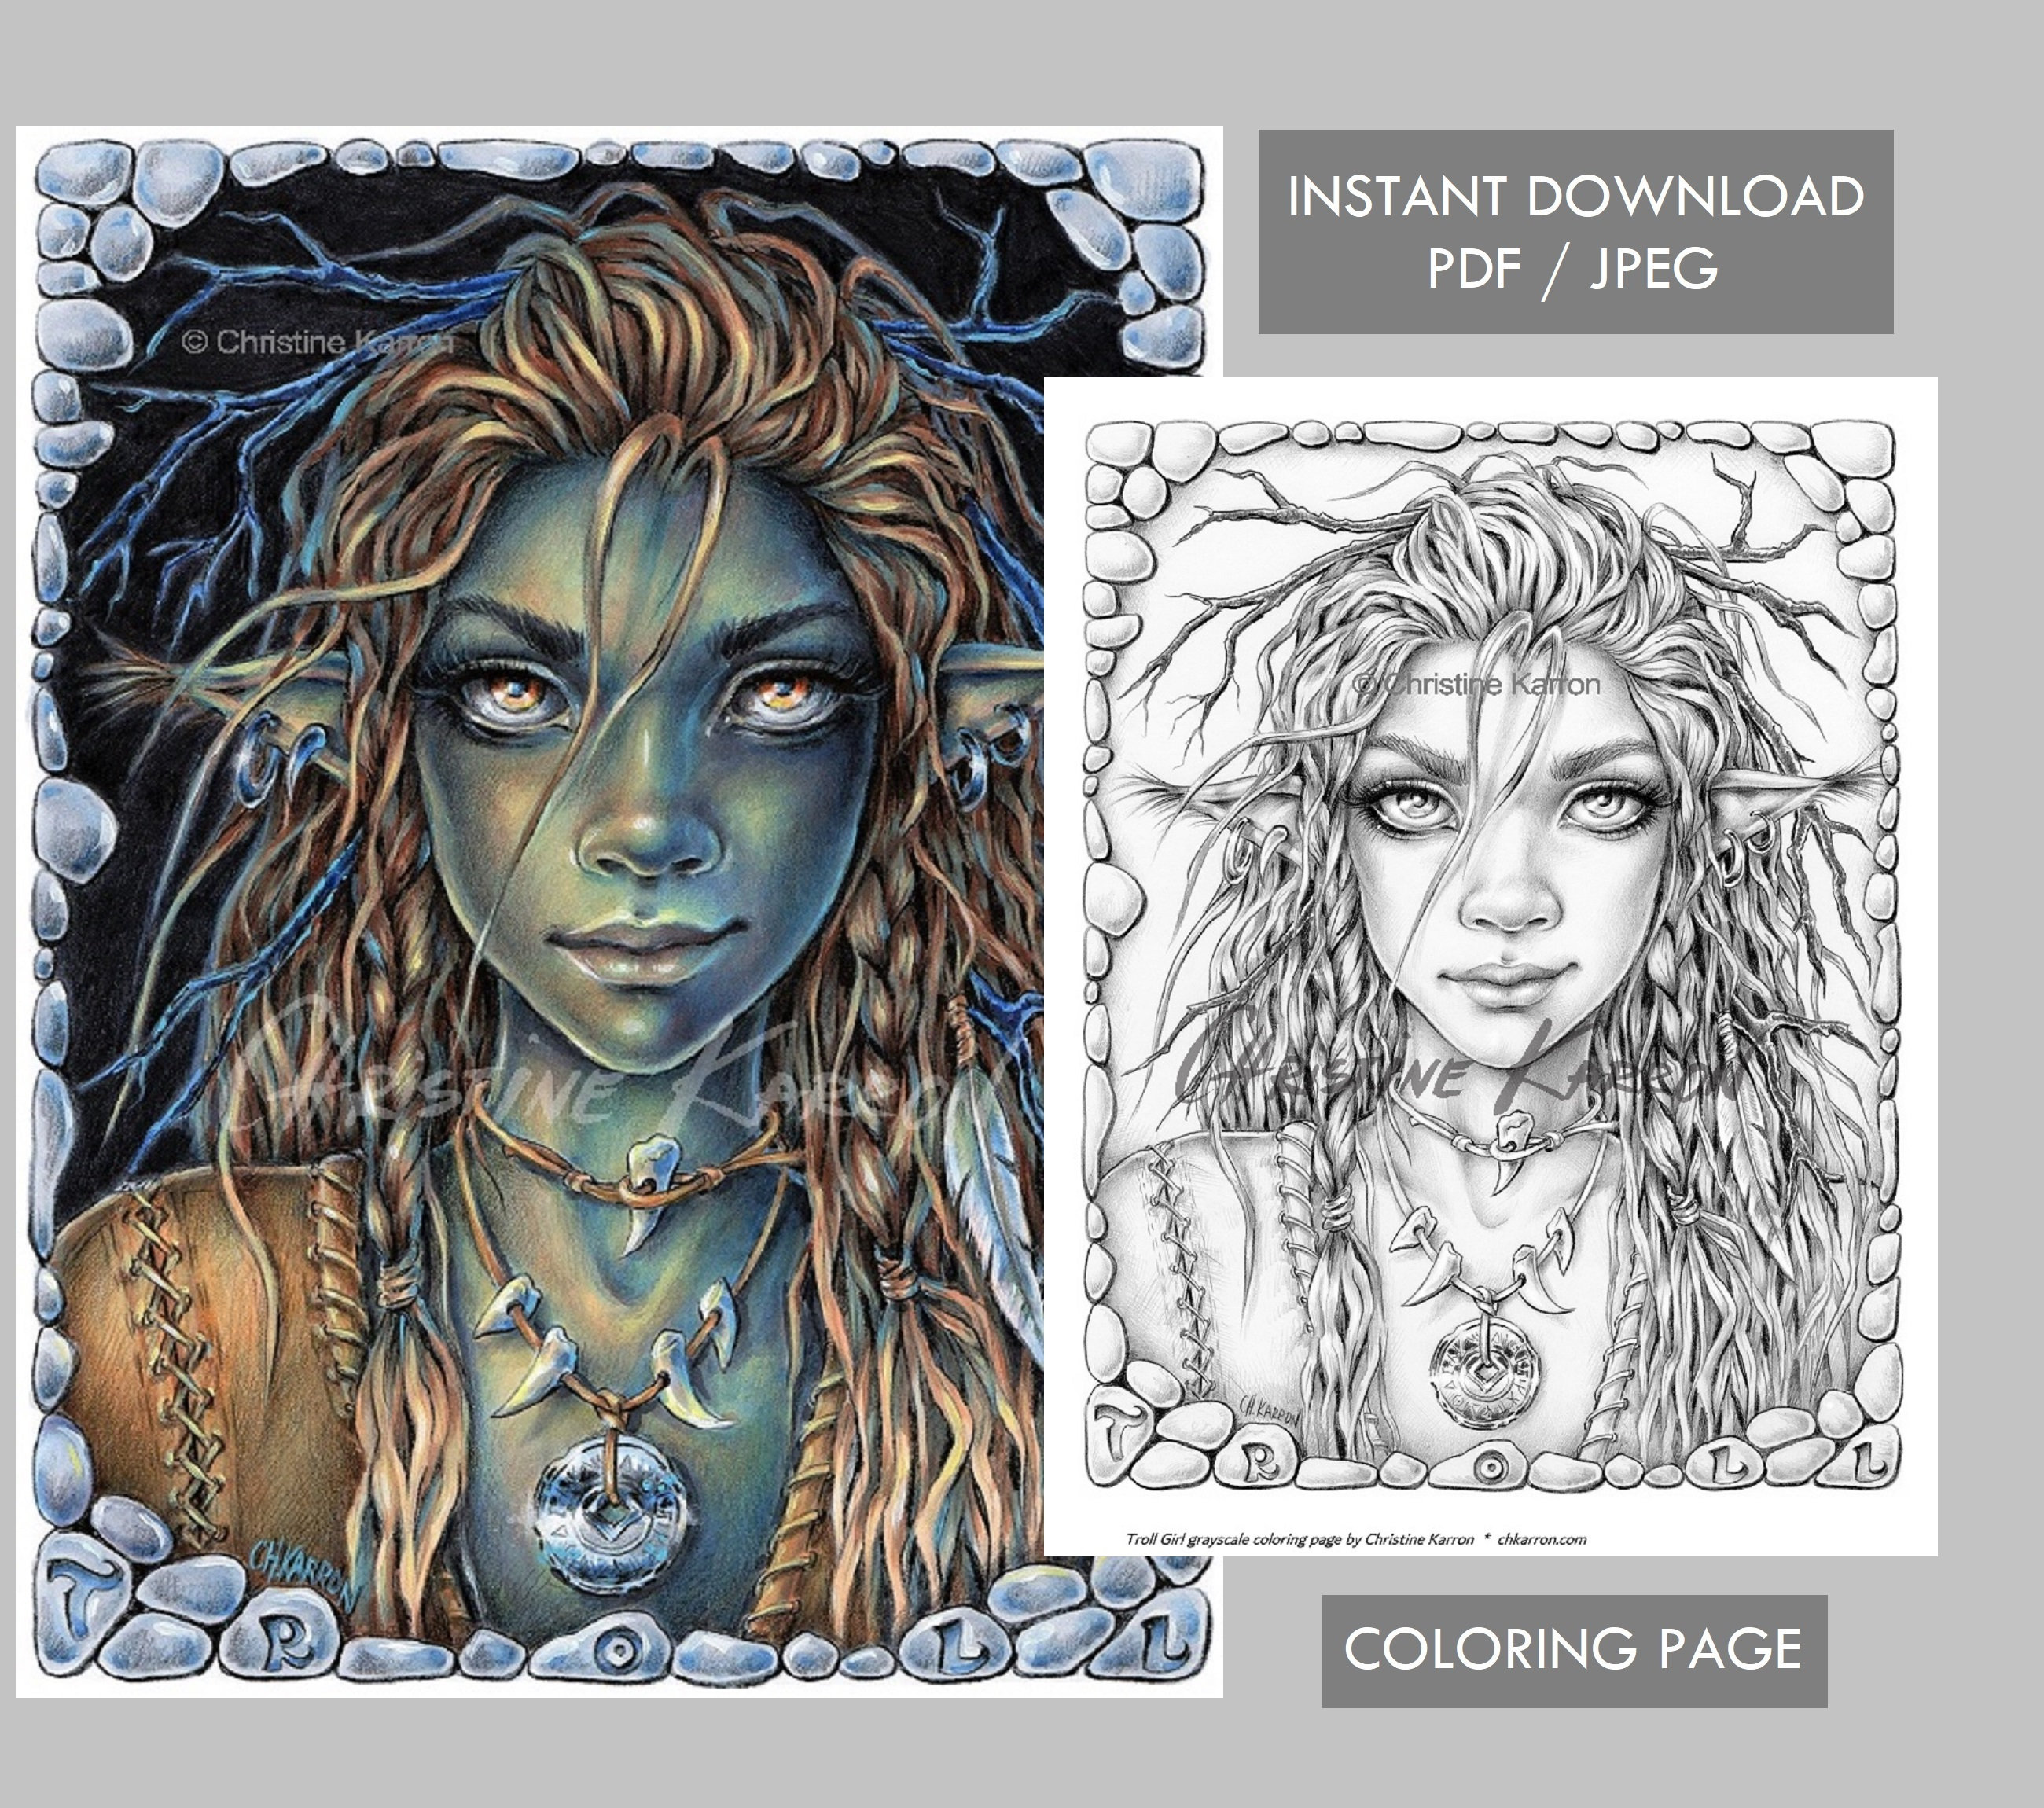 Troll girl coloring page grayscale instant download printable file jpeg and pdf